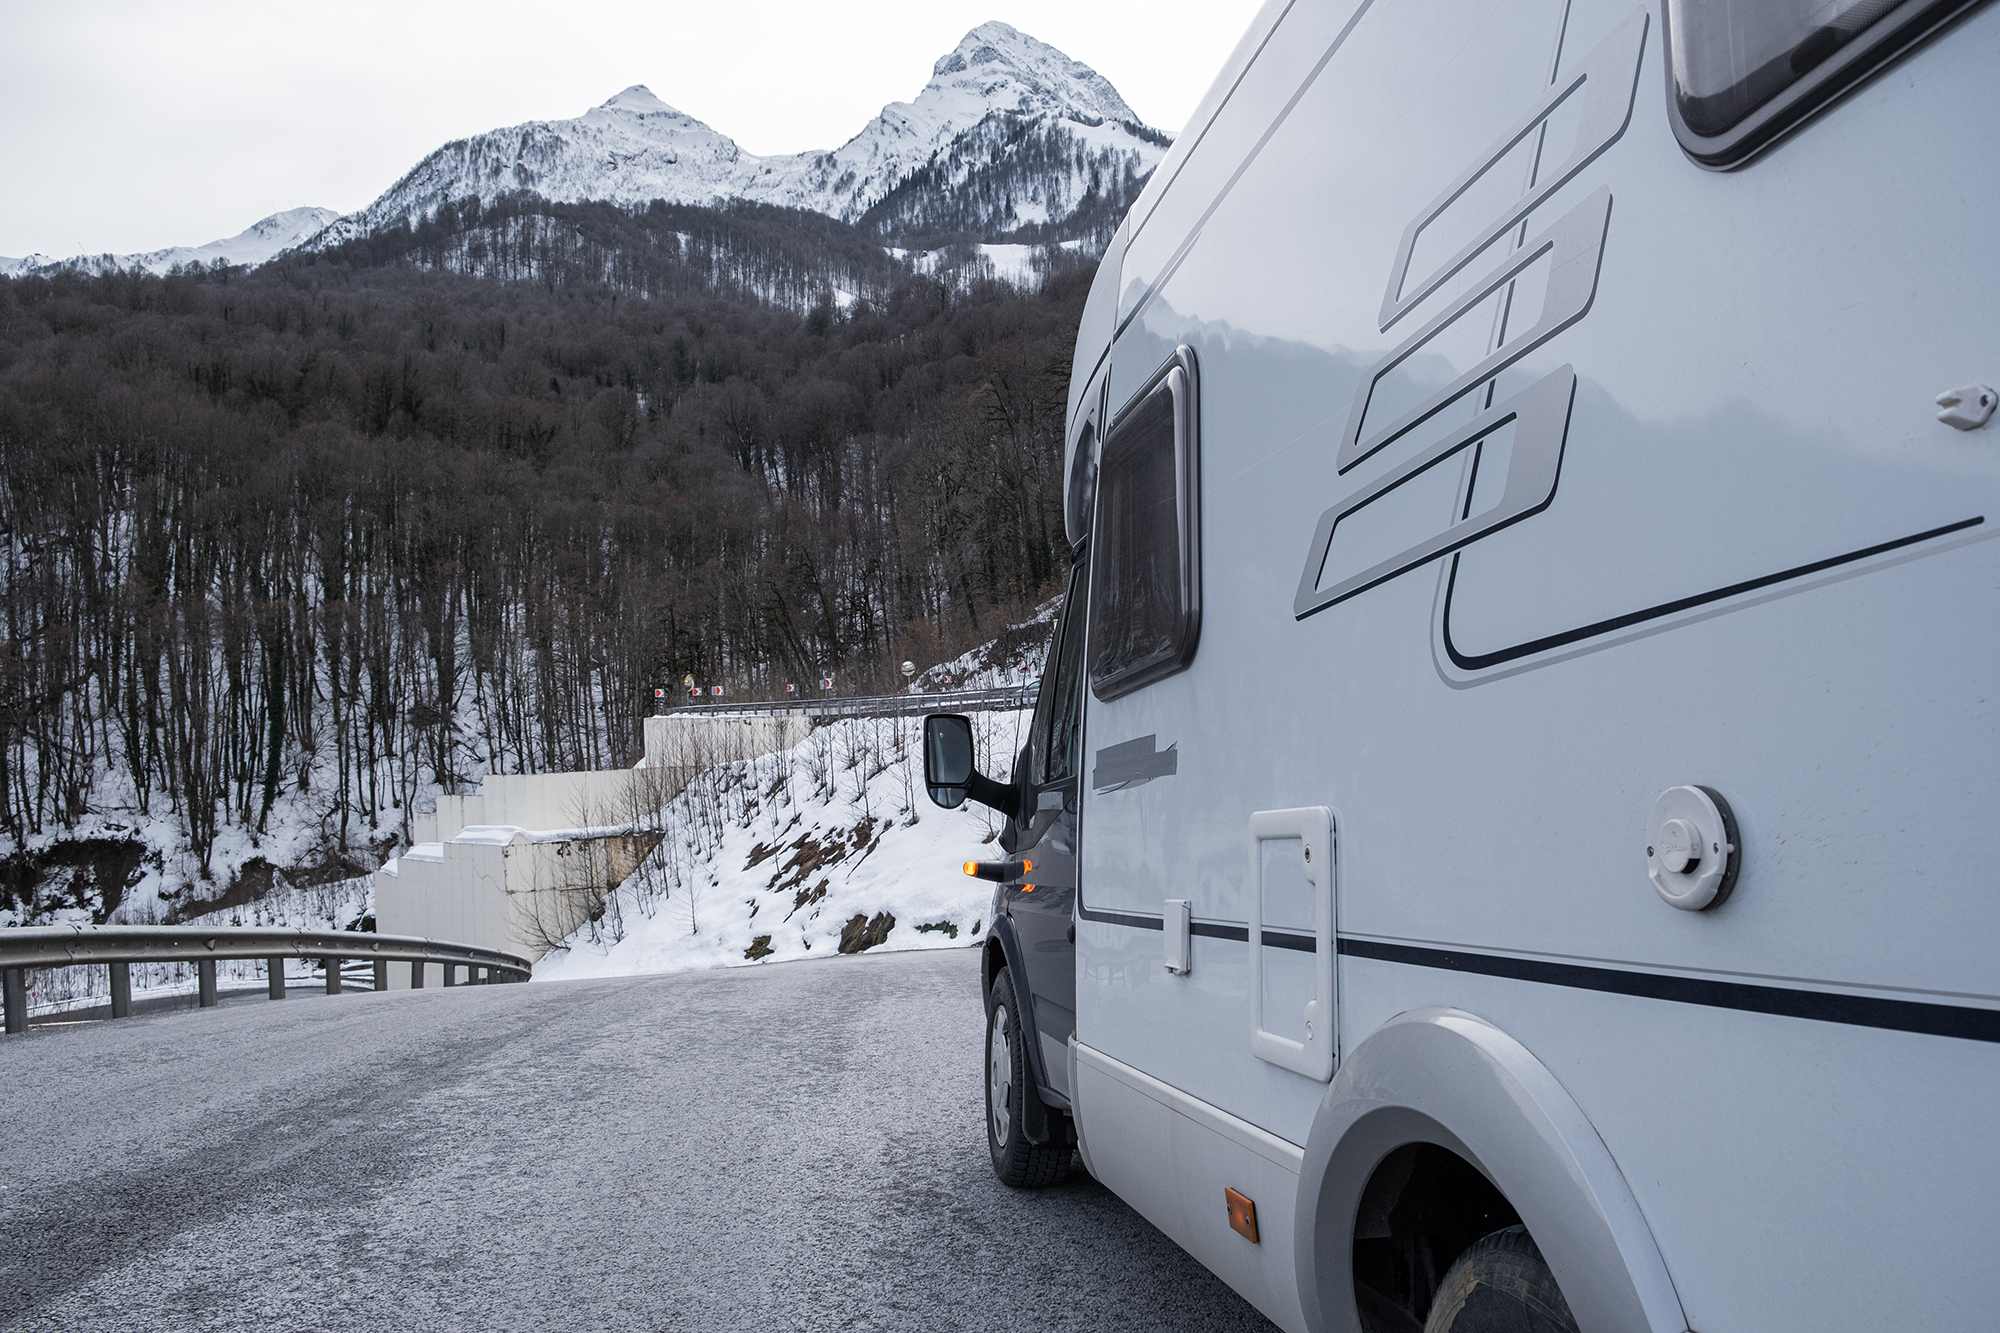 How To Keep Your Motorhome Warm In Winter